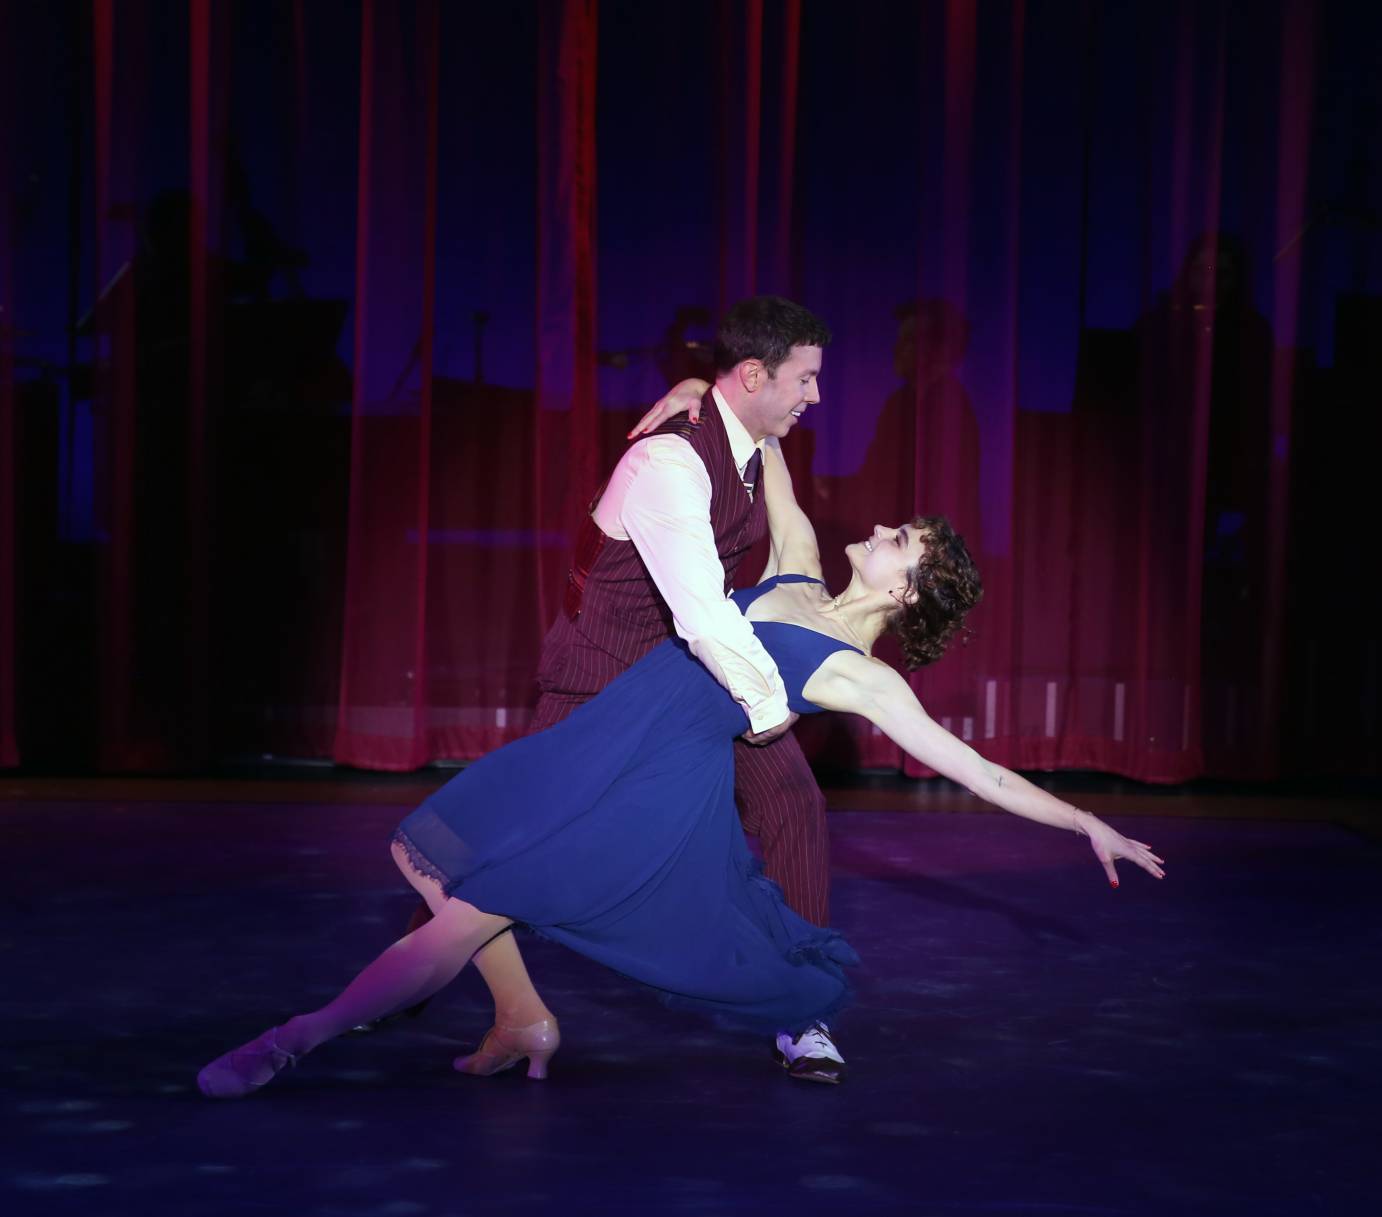 A man in a vest dips Melanie Moore as she creates a diagonal line from her extended leg to one arm lifted. She wears a low,cut, circle-skirt blue dress.